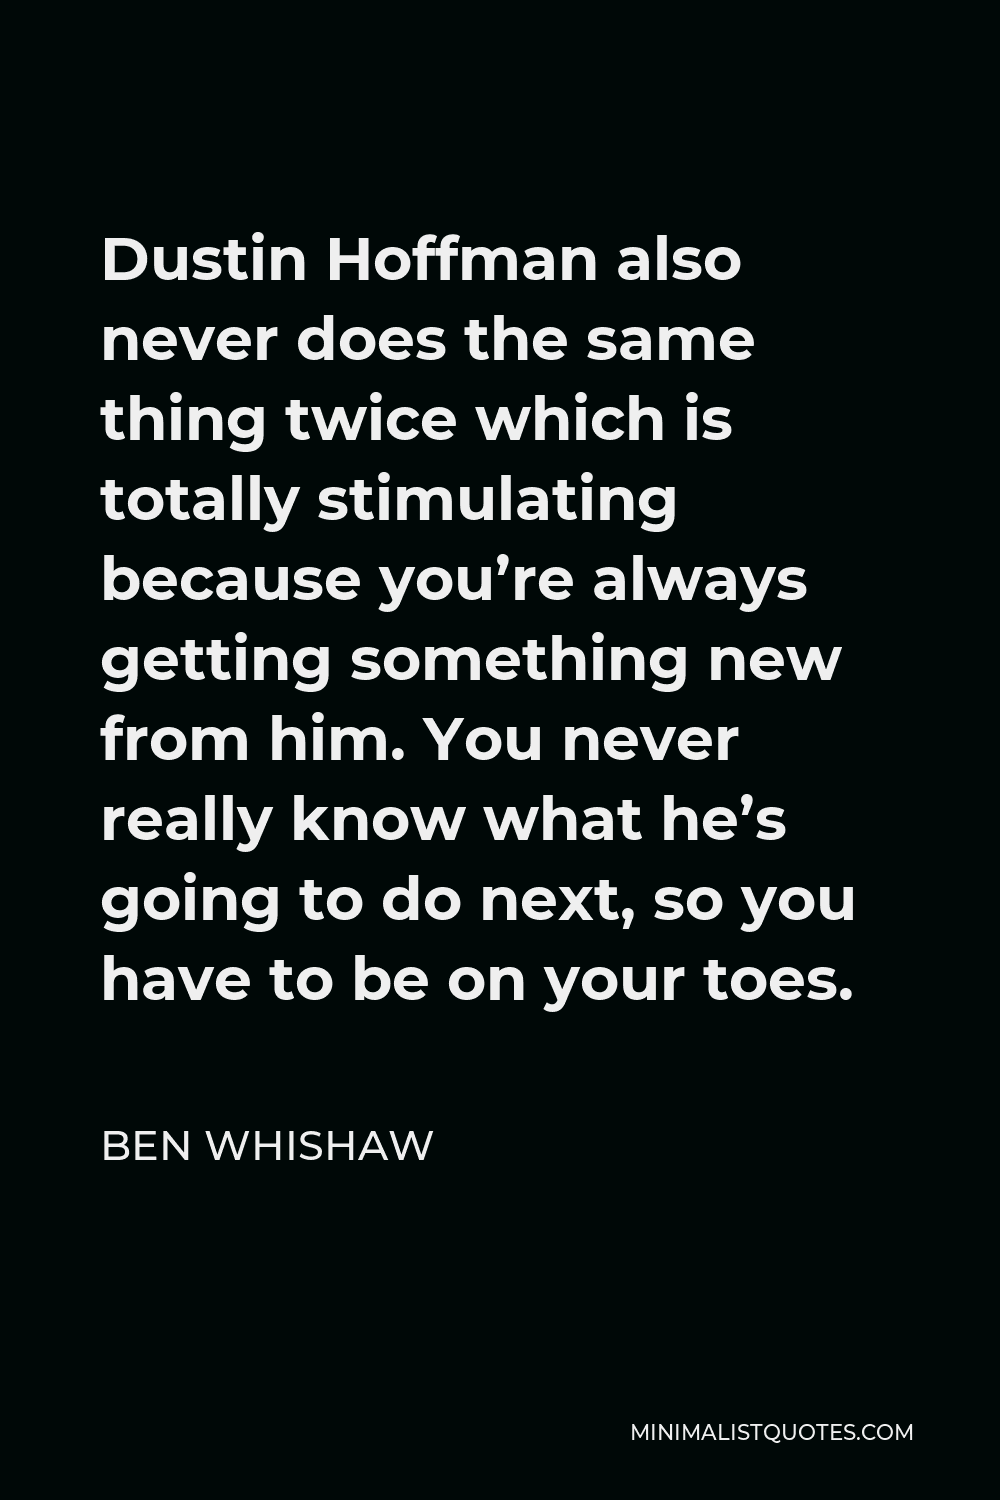 Ben Whishaw Quote - Dustin Hoffman also never does the same thing twice which is totally stimulating because you’re always getting something new from him. You never really know what he’s going to do next, so you have to be on your toes.